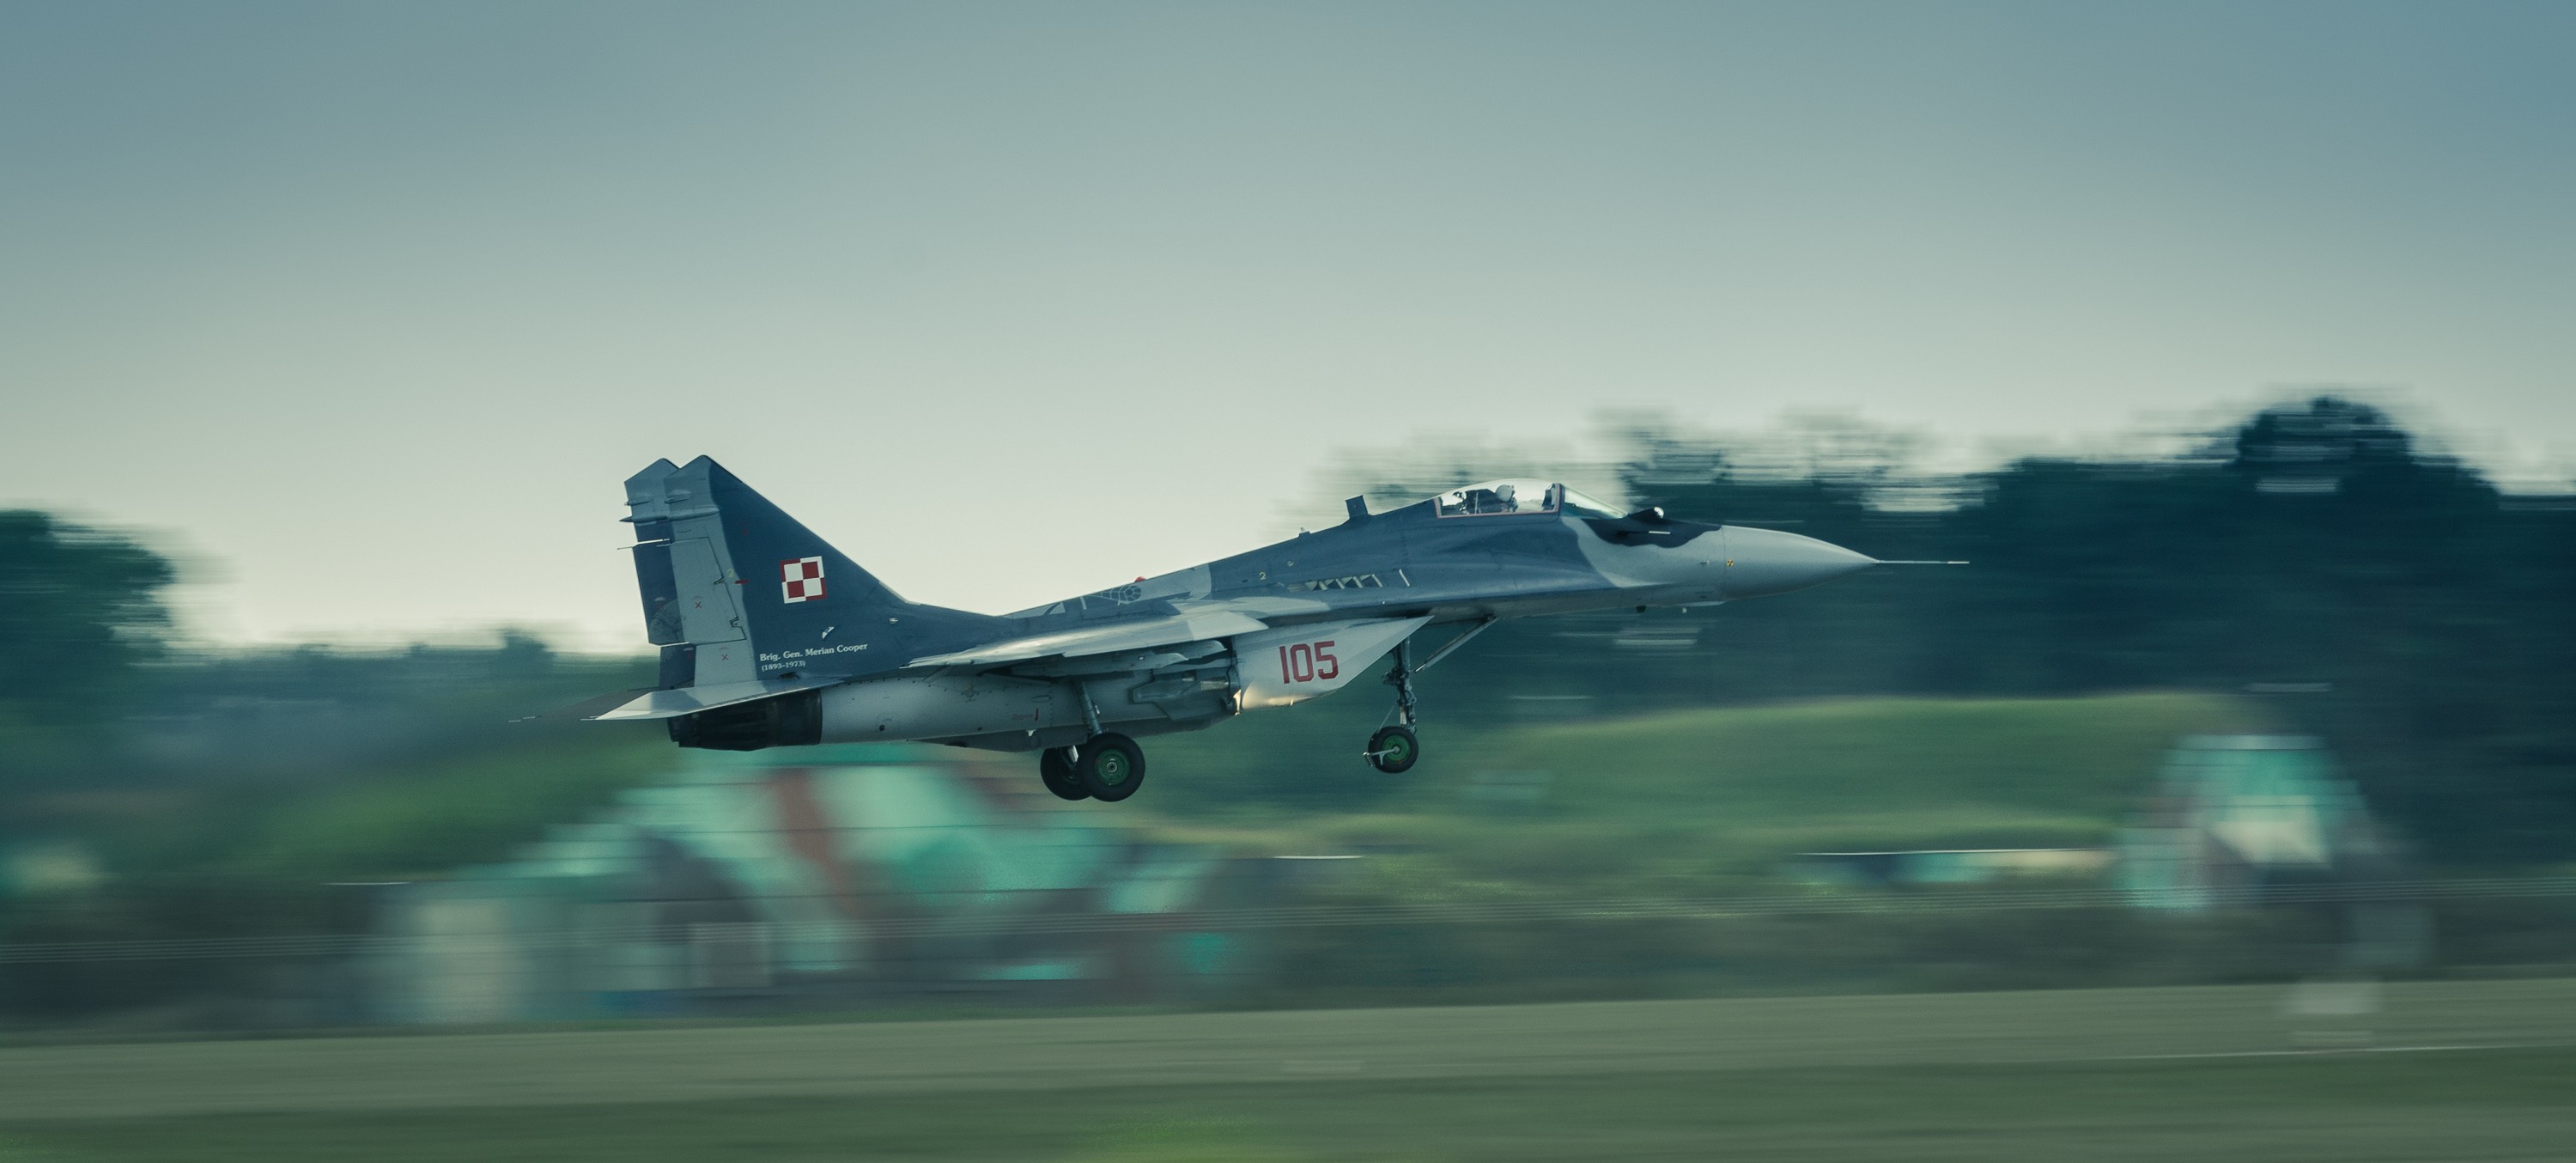 Polish Air Force, Mig 29, Military, Military Aircraft, Jet Fighter Wallpaper